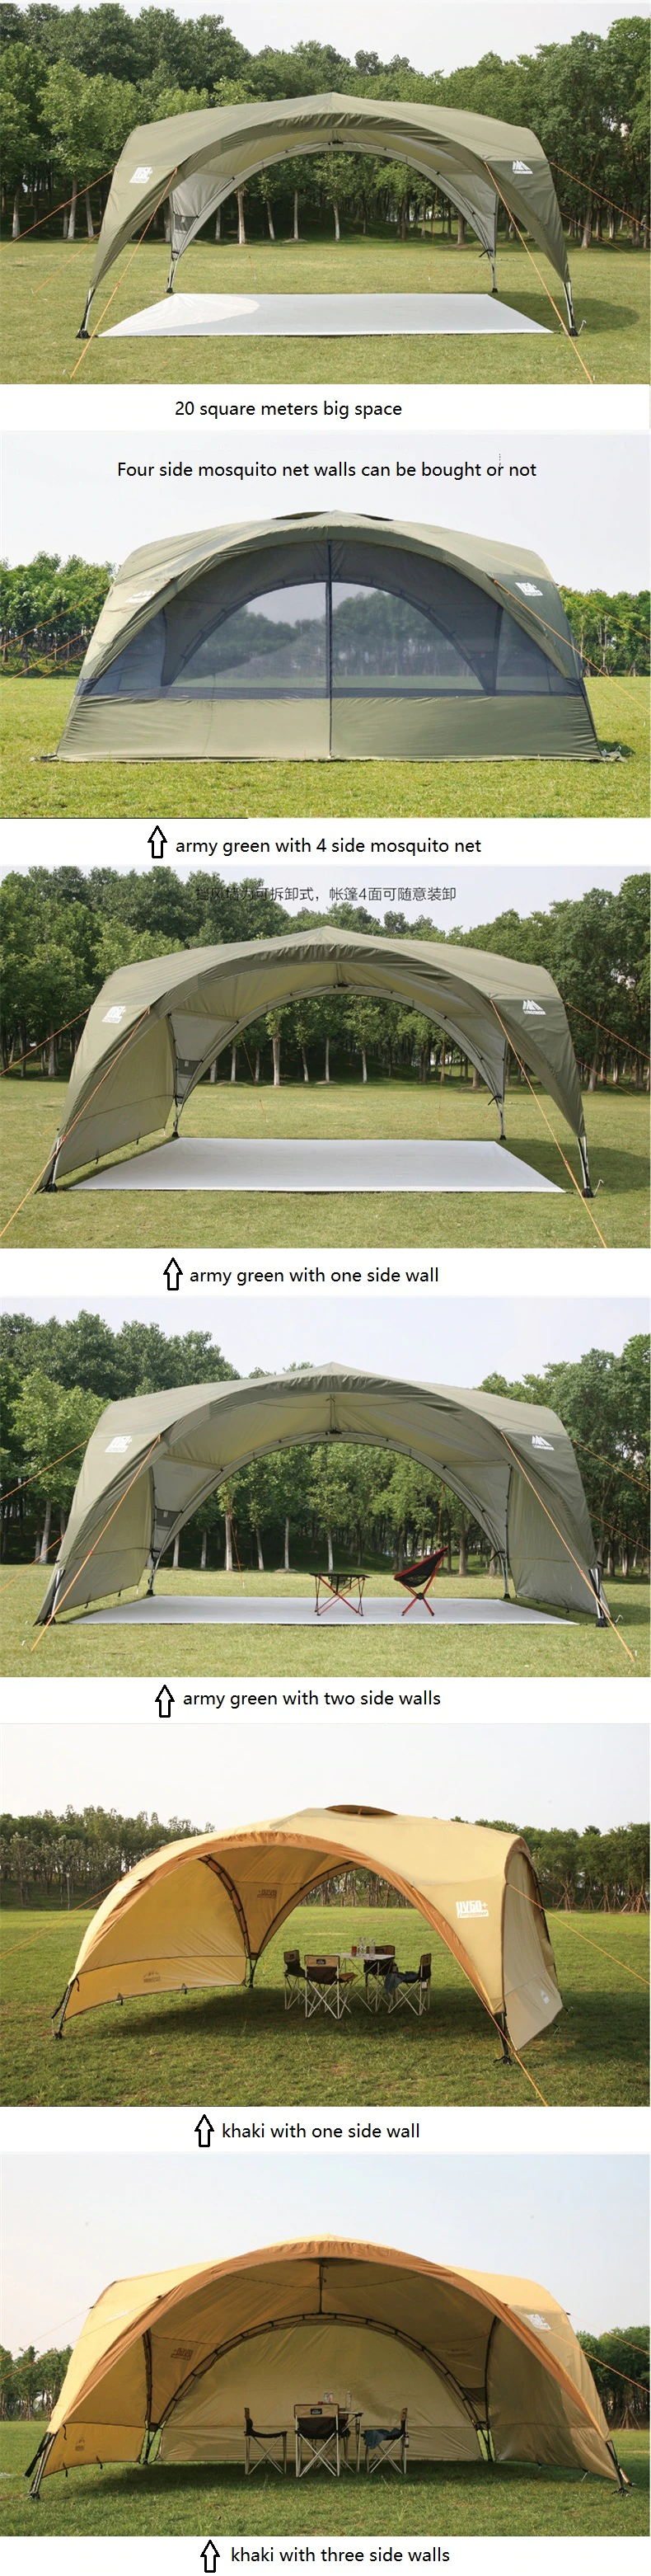 Cheap Goat Tents Summer Outdoor Super Large Camping Tent Canopy Tent Awning Advertising Tents Sun Shelter Beach Tent Ultralarge Anti